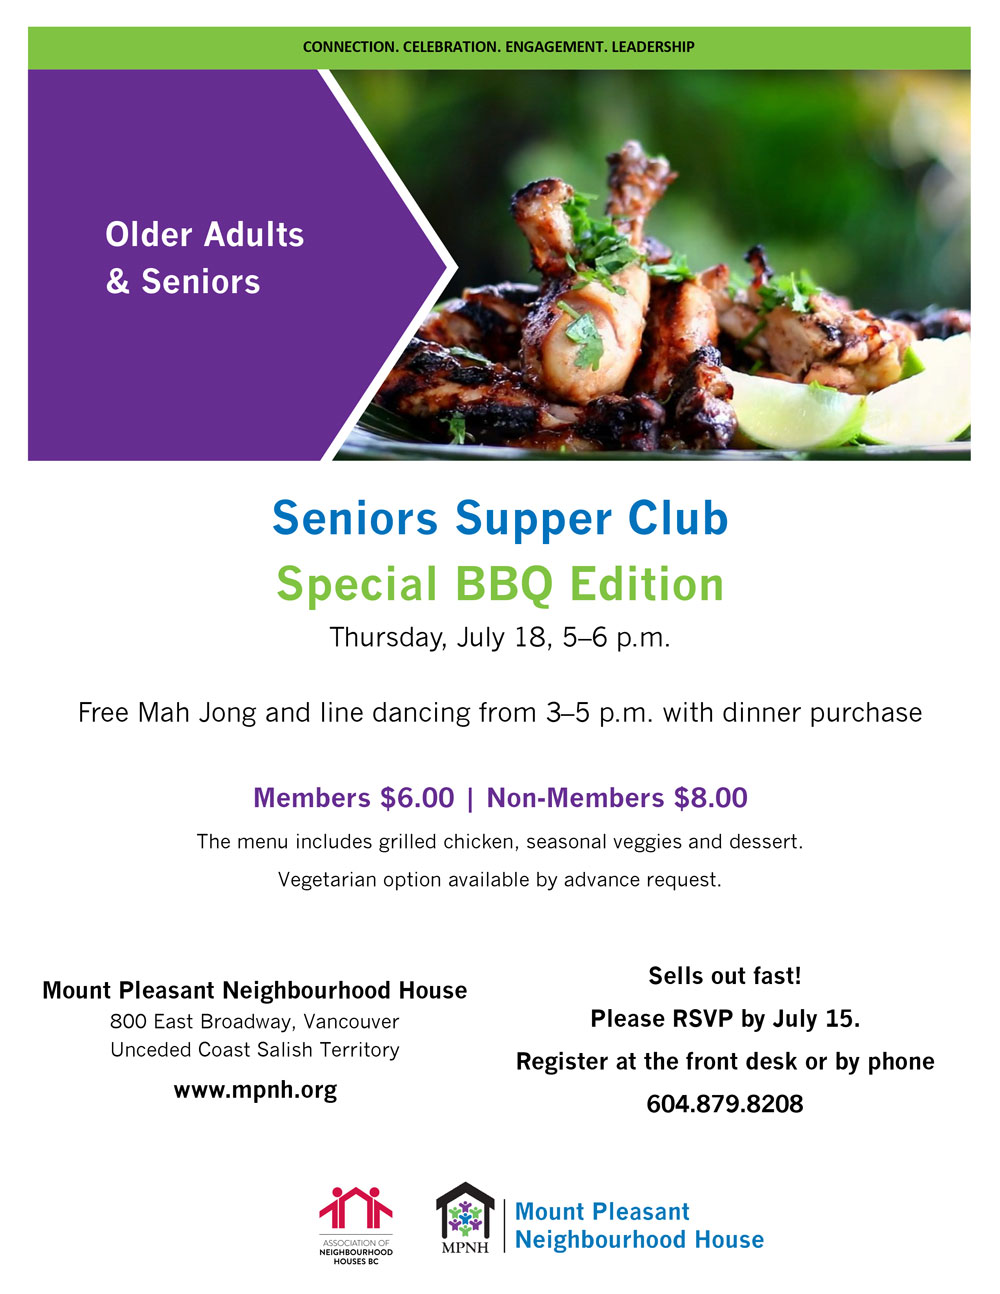 An image of the poster with event details, featuring a plate of barbecue chicken